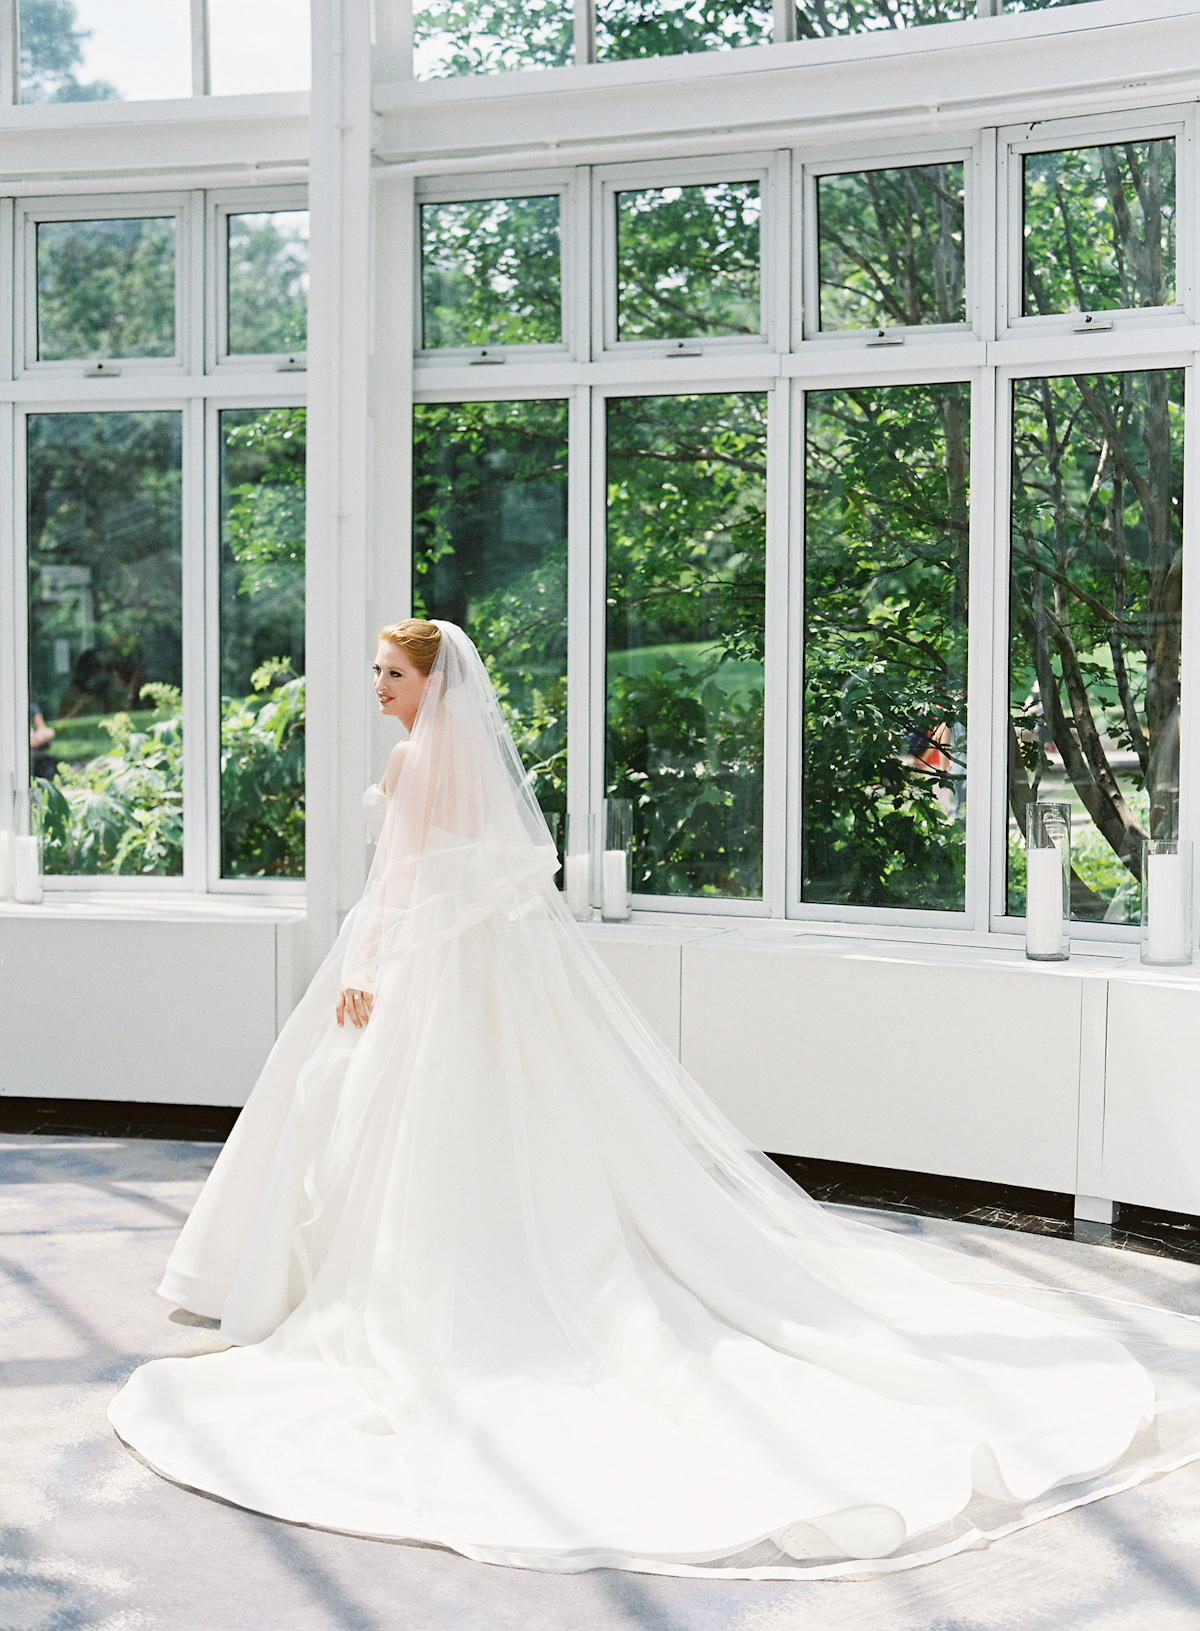 Brooklyn Botanic Gardens wedding, Judy Pak Photography, Ang Weddings and Events, Mimosa Floral Design, Isabelle Armstrong gown